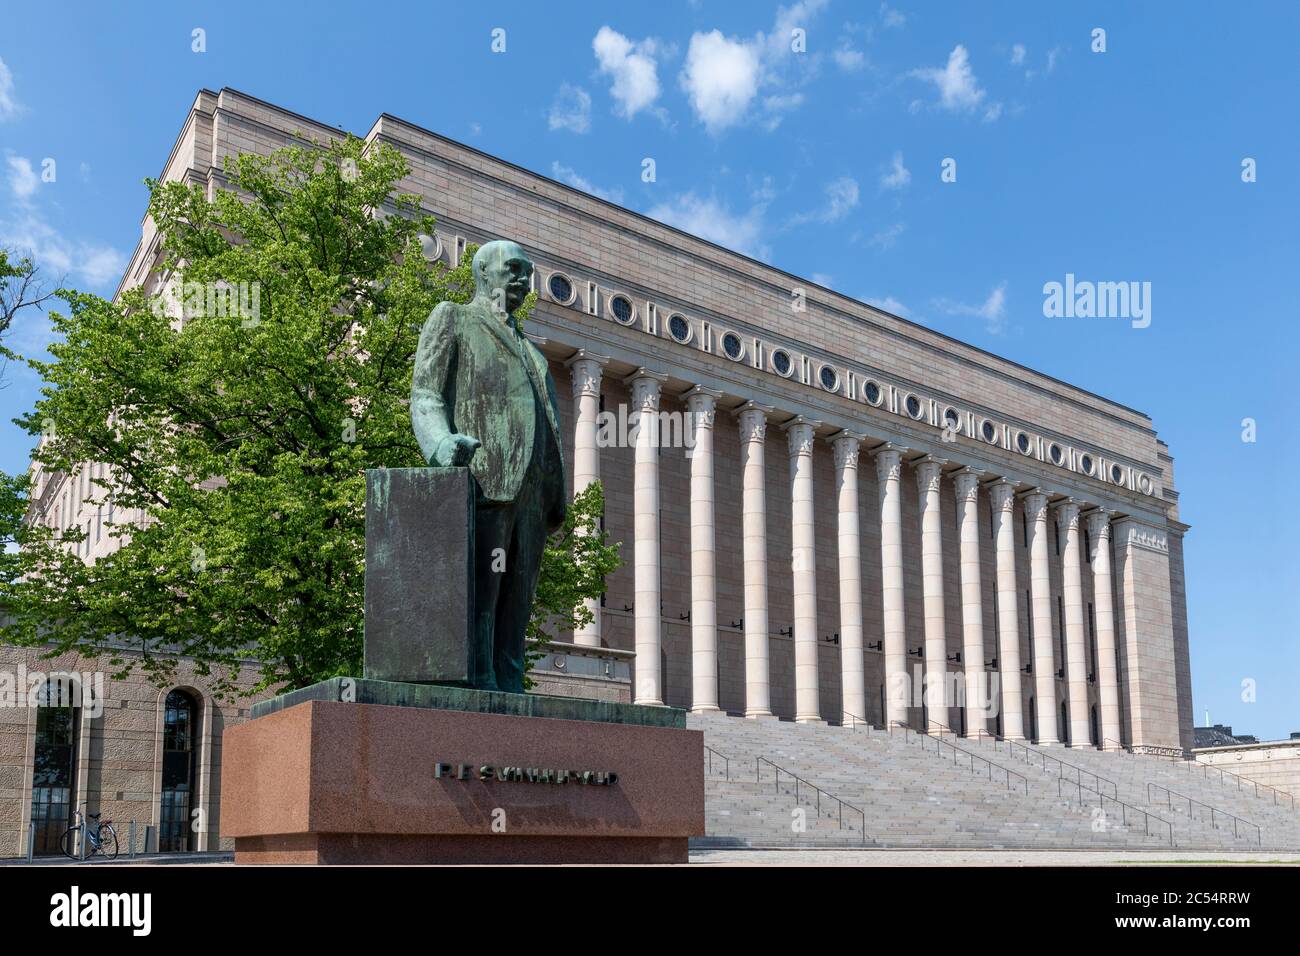 Statues of former presidents are standing around of Finnish parliament building. P.E.Svinhufvud has his memorial on South-East corner of the building. Stock Photo